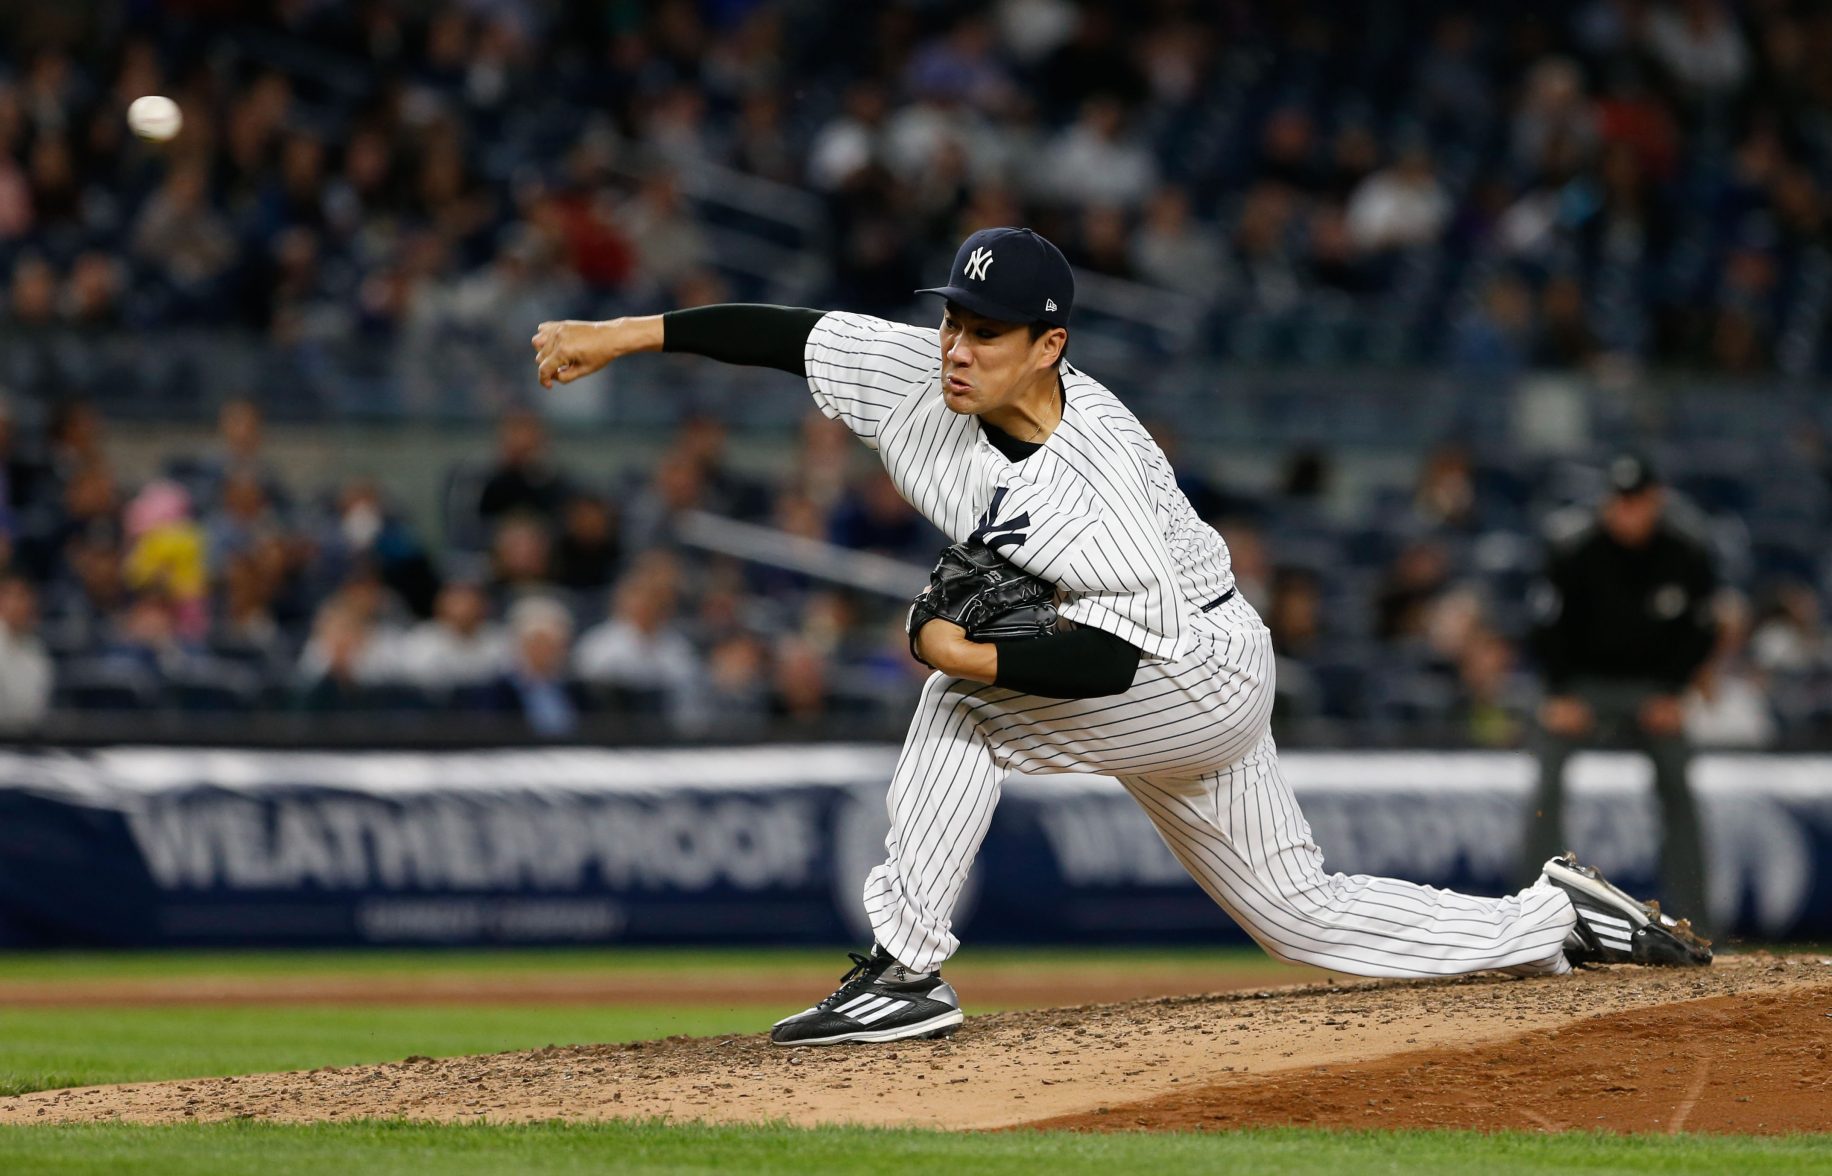 Oakland Athletics @ New York Yankees, 5/26/17: Lineups & Preview 